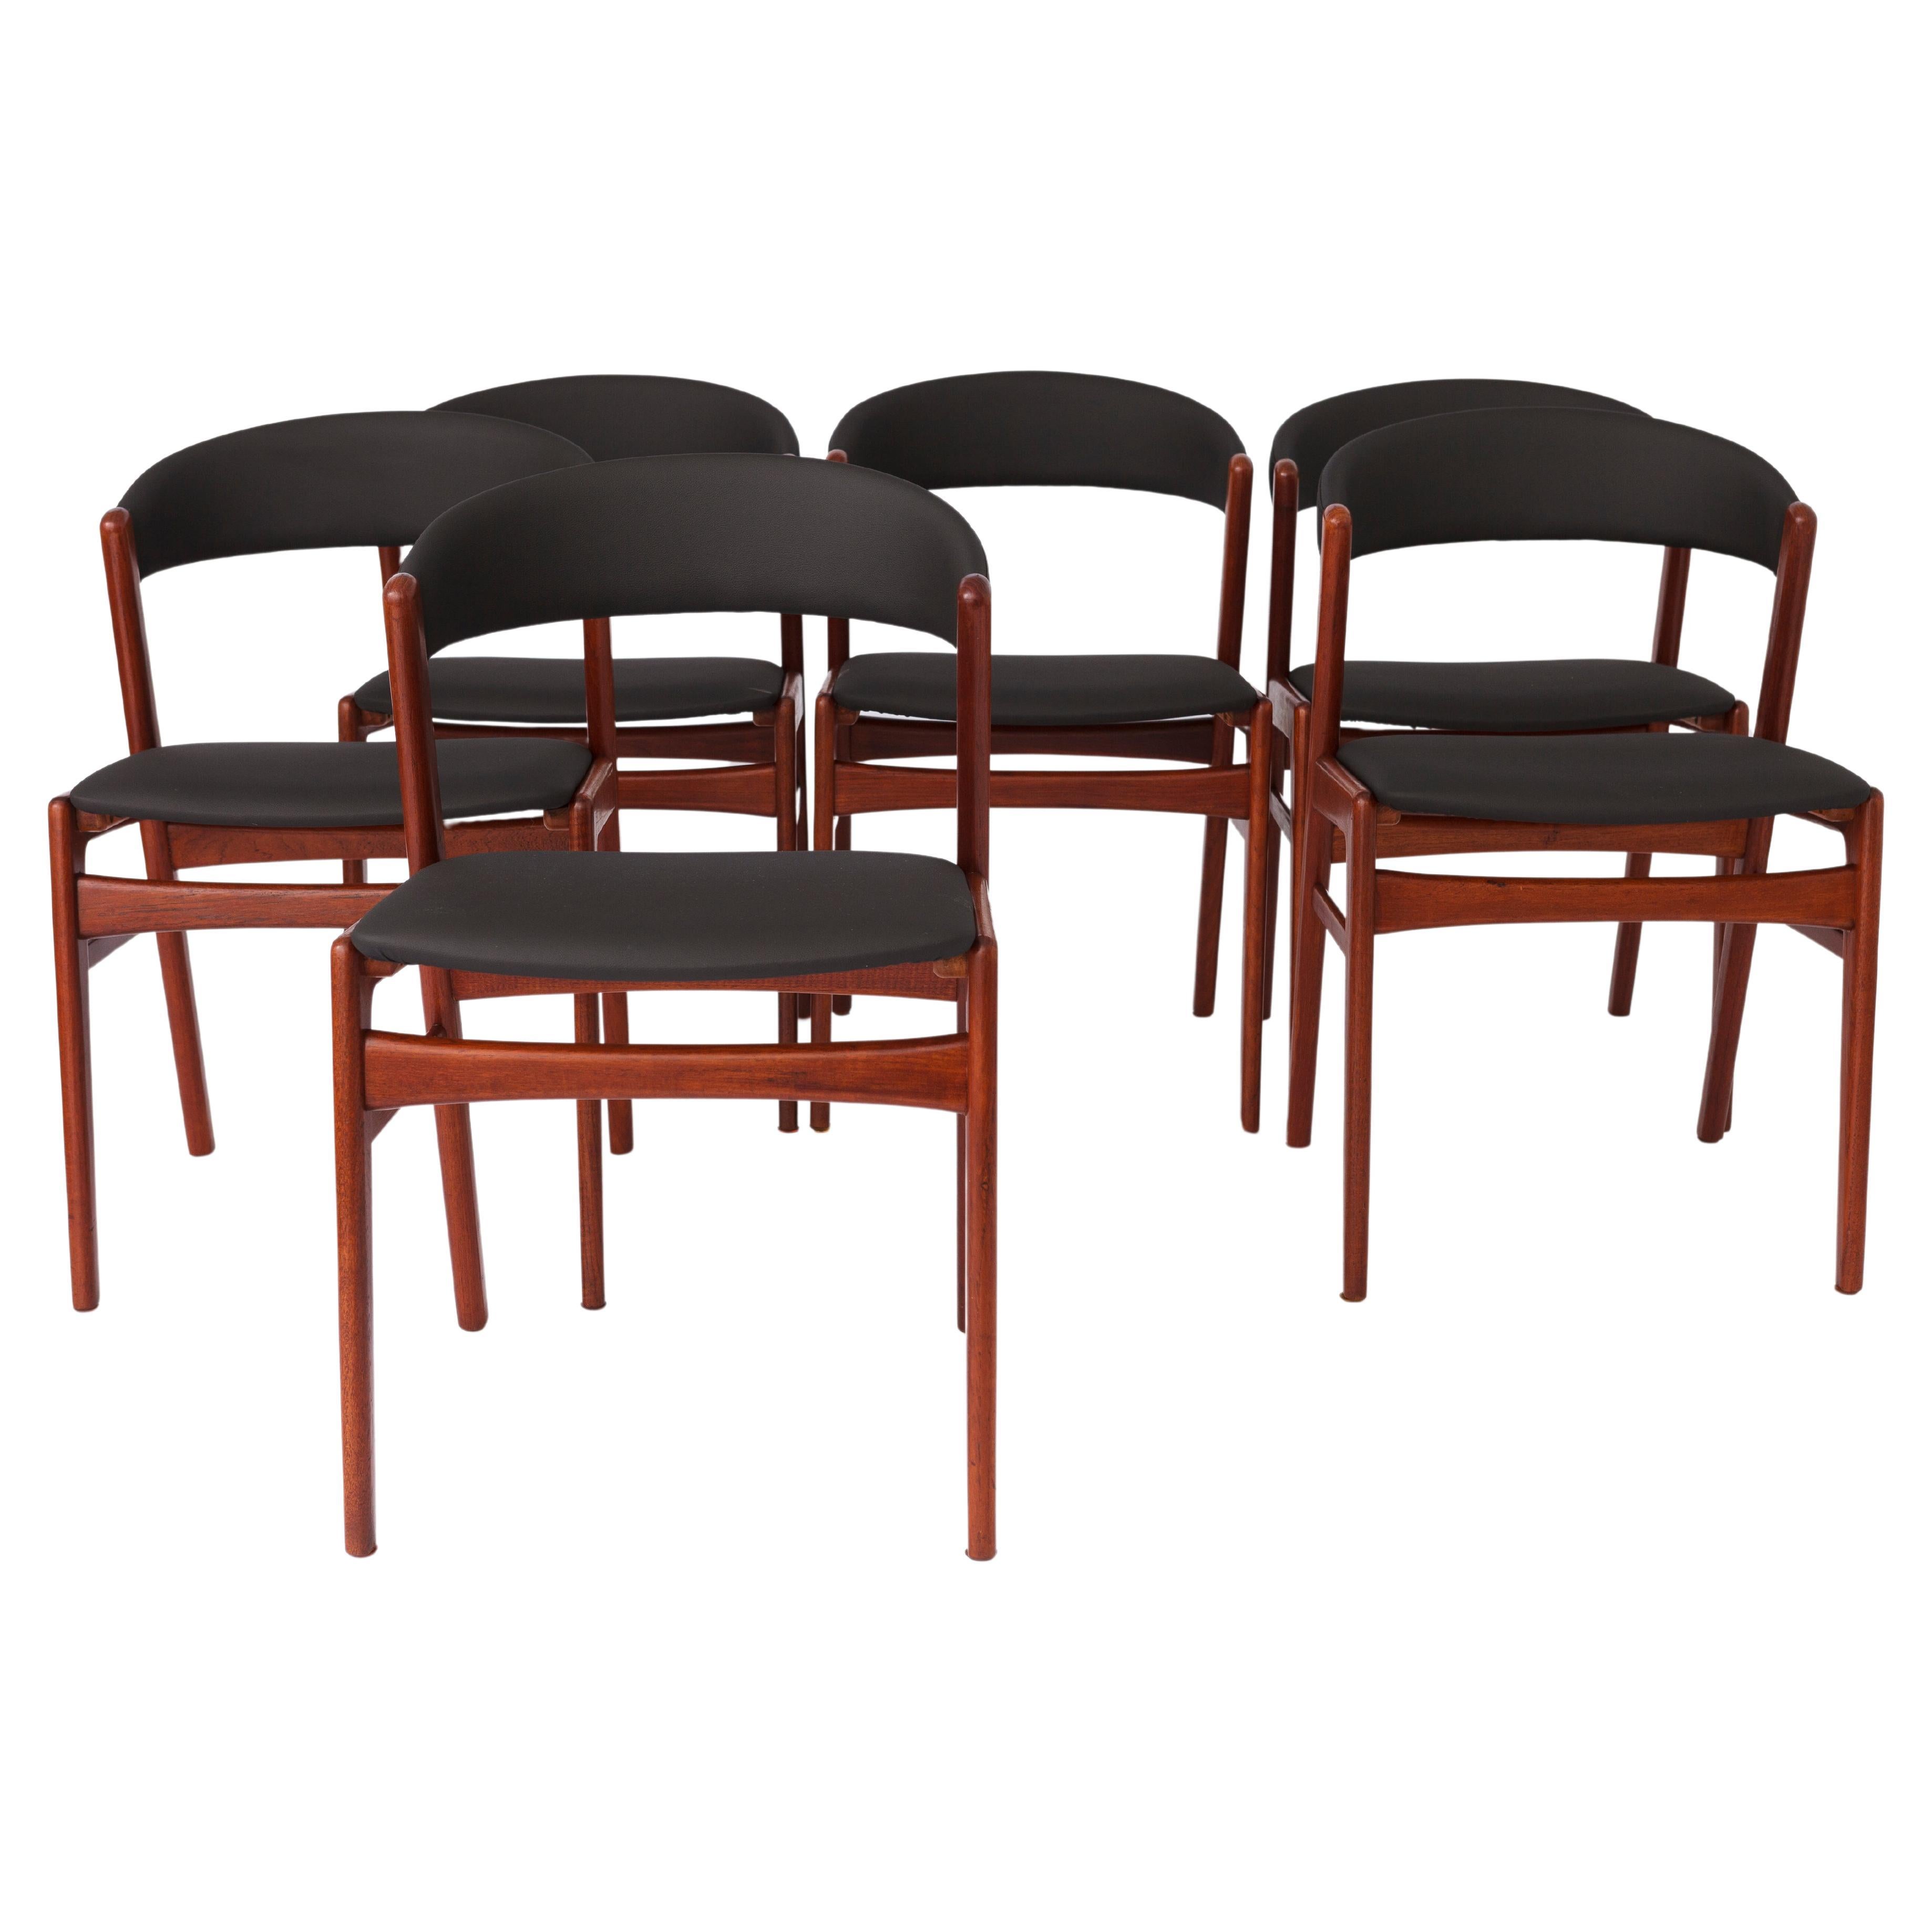 6 Vintage Chairs DUX - Ribbon Back 1960s, Sweden - Dining chairs, Teak, Set of 6 For Sale